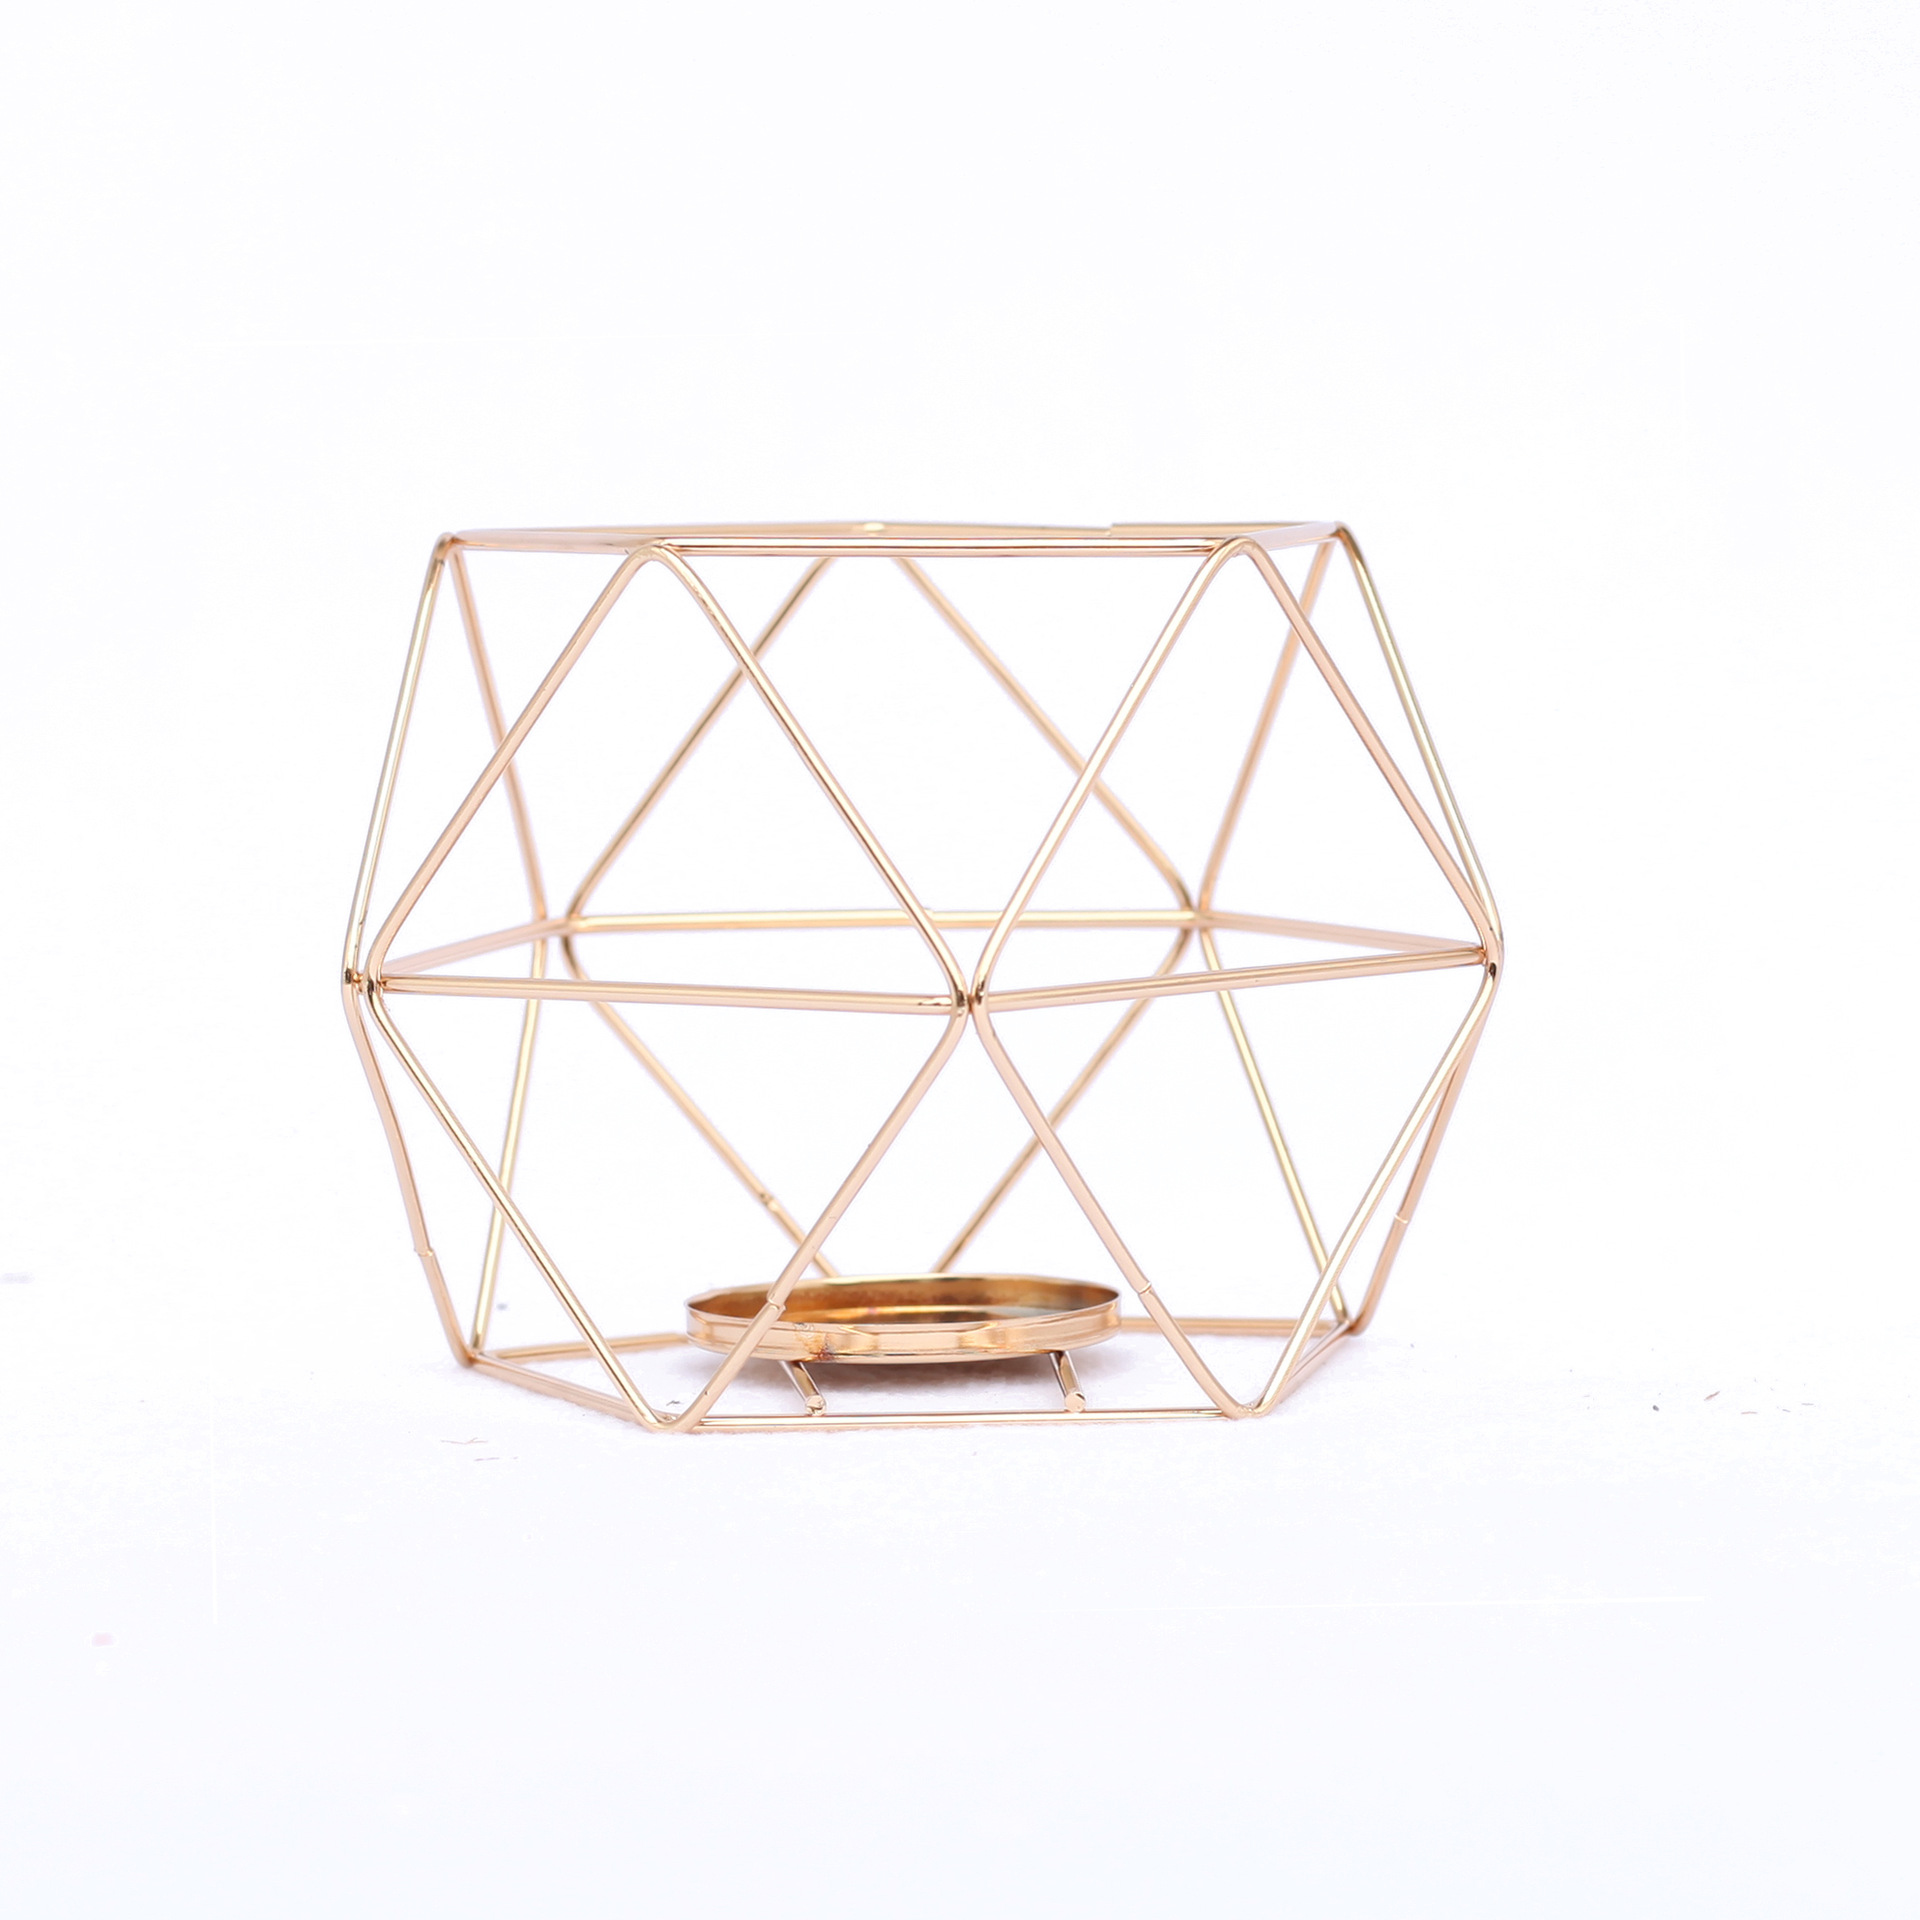 Creative Nordic Wrought Iron Geometric Candle Holder Ornaments Aromatherapy Candle Holder Home Bedroom Living Room Model Room Decorations